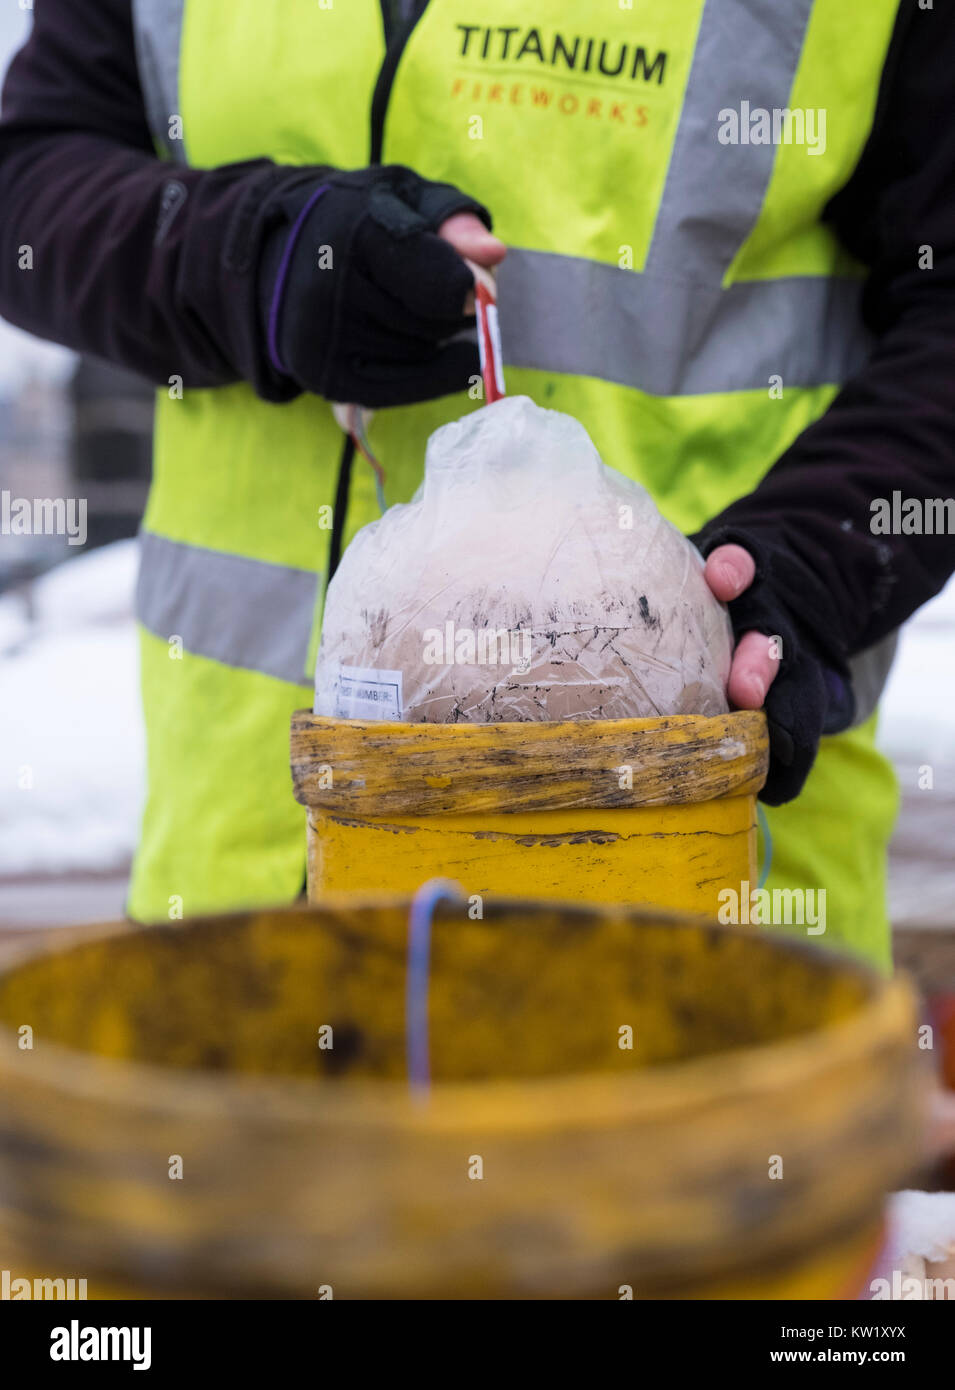 Edinburgh, Scotland, United Kingdom. 29th Dec, 2017. Pyrotechnicians from Titanium Fireworks demonstrate large fireworks and launching tubes at Edinburgh Castle ahead of the annual Hogmanay fireworks display on New Years Eve. Here a 150mm shell is shown being installed This is the largest shell used in the display. Credit: Iain Masterton/Alamy Live News Stock Photo